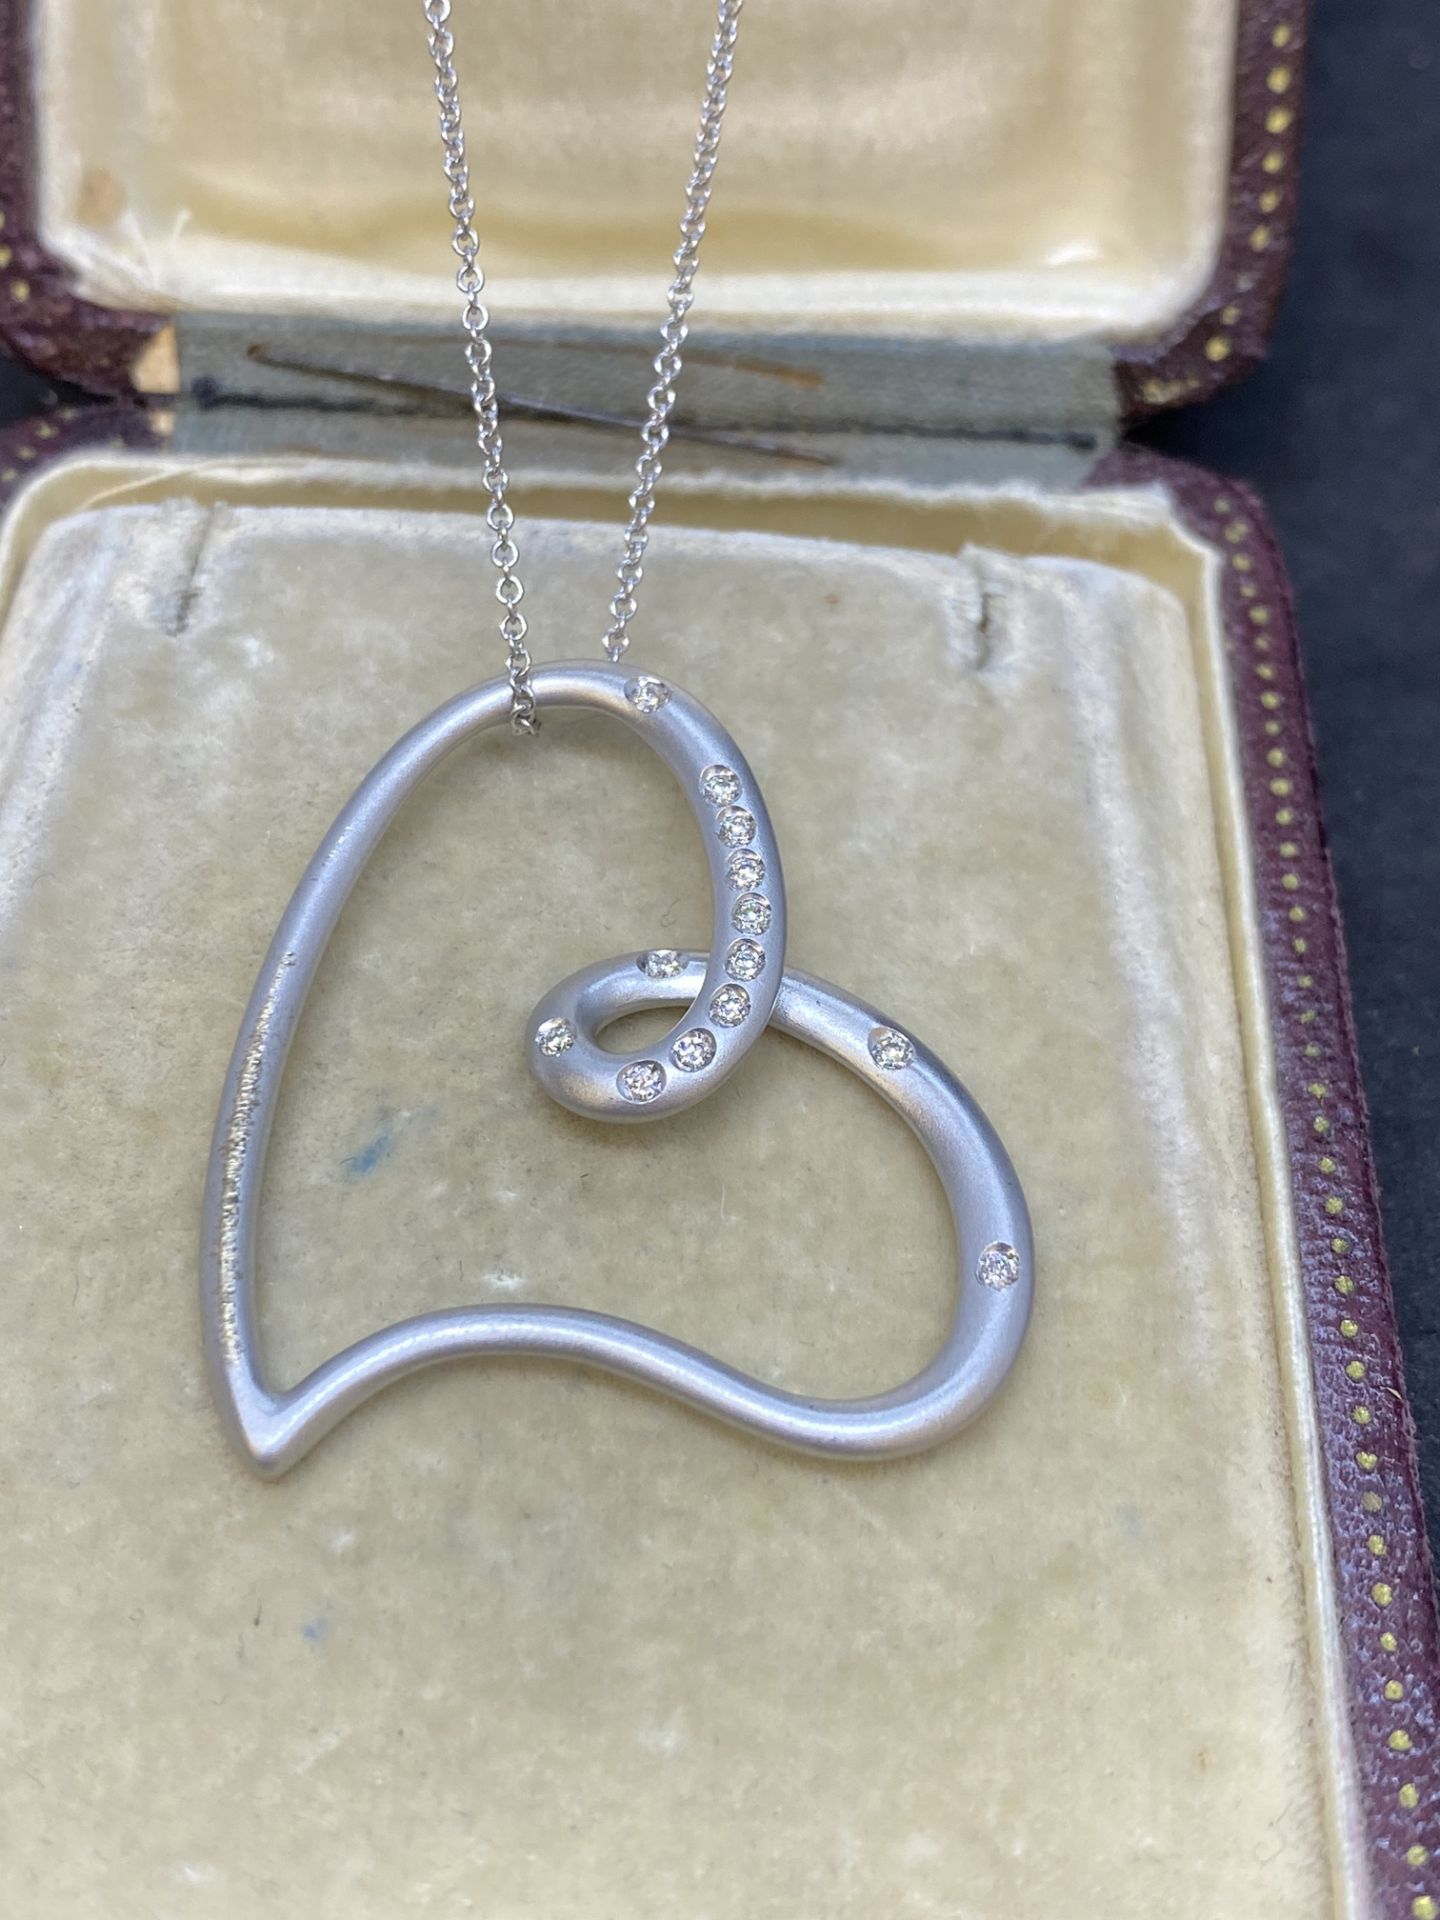 18ct GOLD DIAMOND SET HEART WITH CHAIN 9 GRAMS - Image 2 of 4